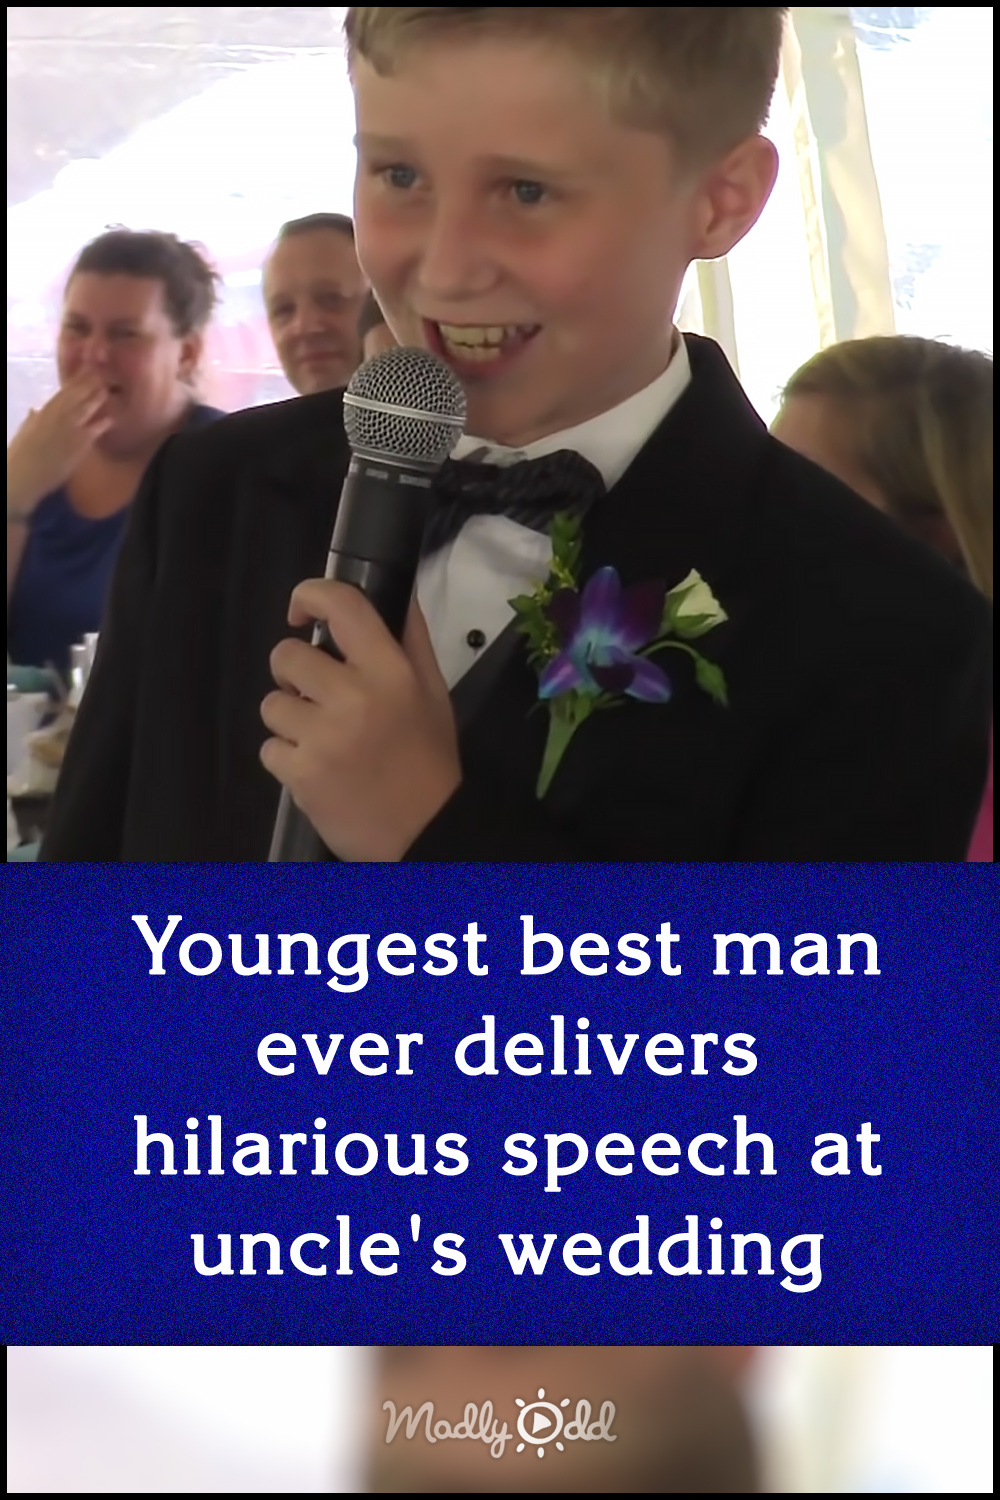 Youngest best man ever delivers hilarious speech at uncle\'s wedding